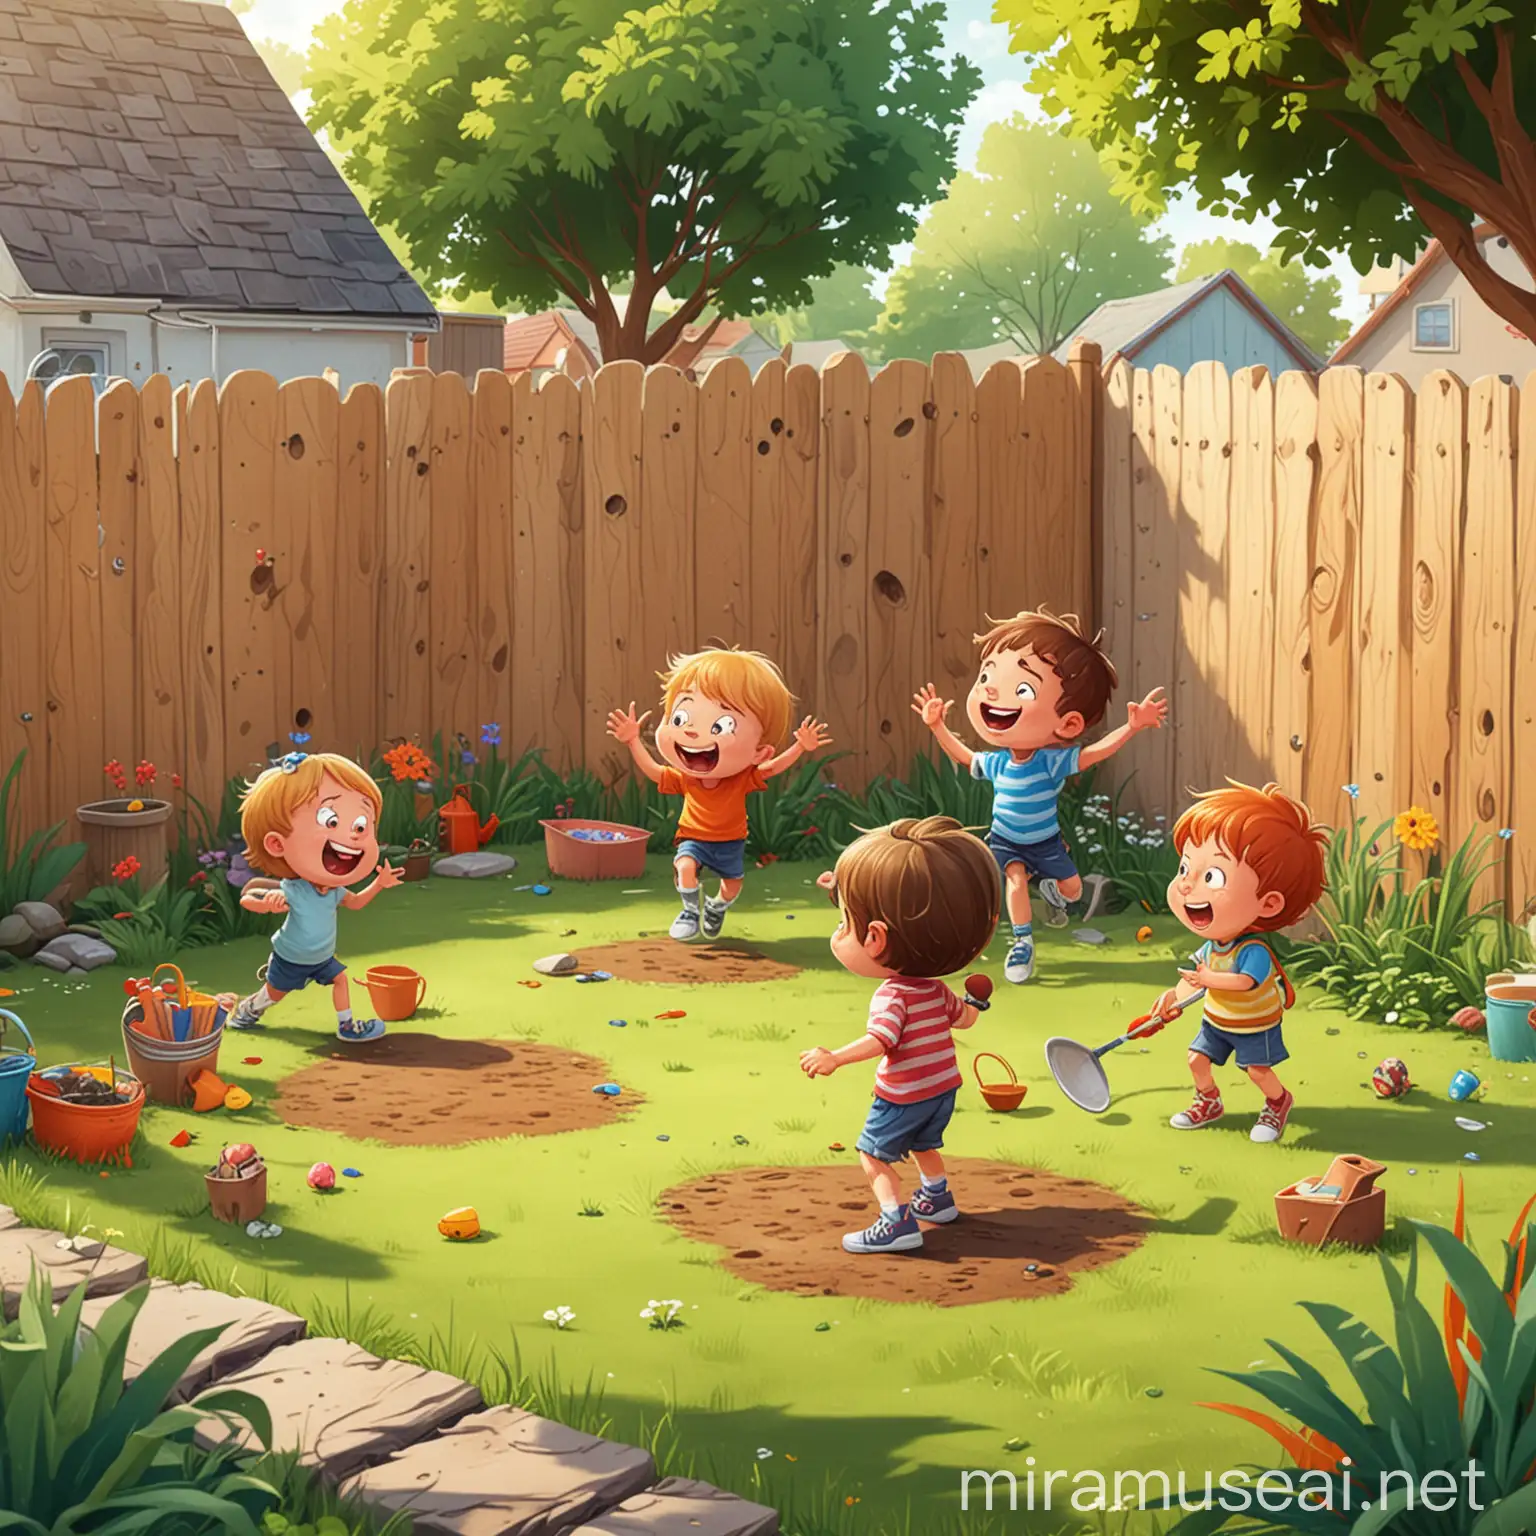 Cartoon Kids Playing in a Colorful Backyard Playground